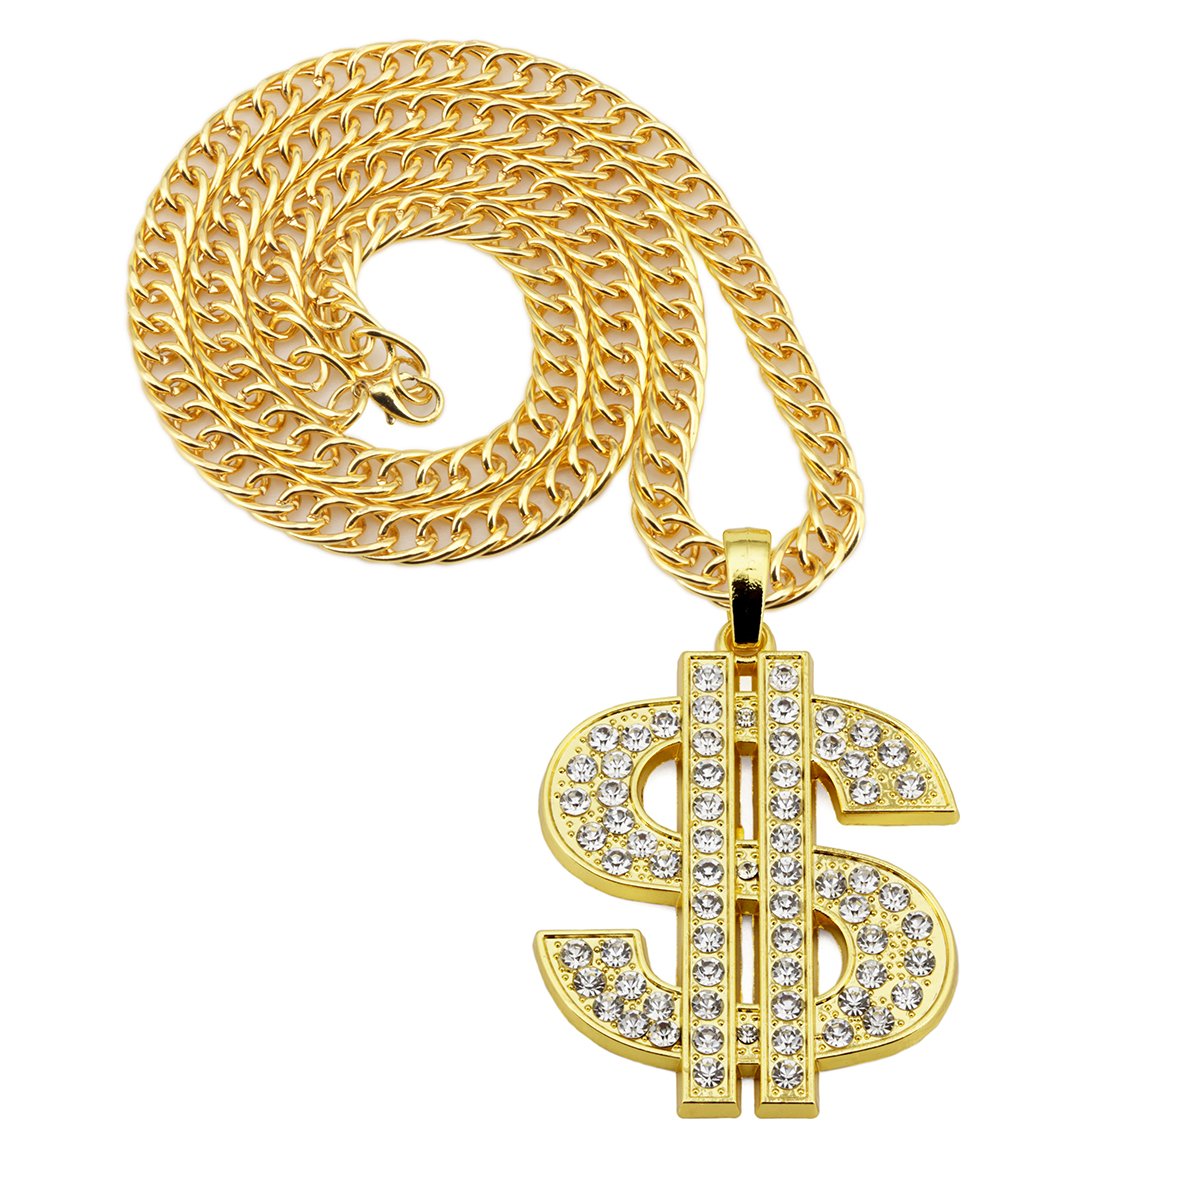 AHIER Gold Necklace Chain with Dollar Sign, 18K Gold Plated Hip Hop Chain Necklace Pendant for Men, 30inch (Rotatable,Lion Head)